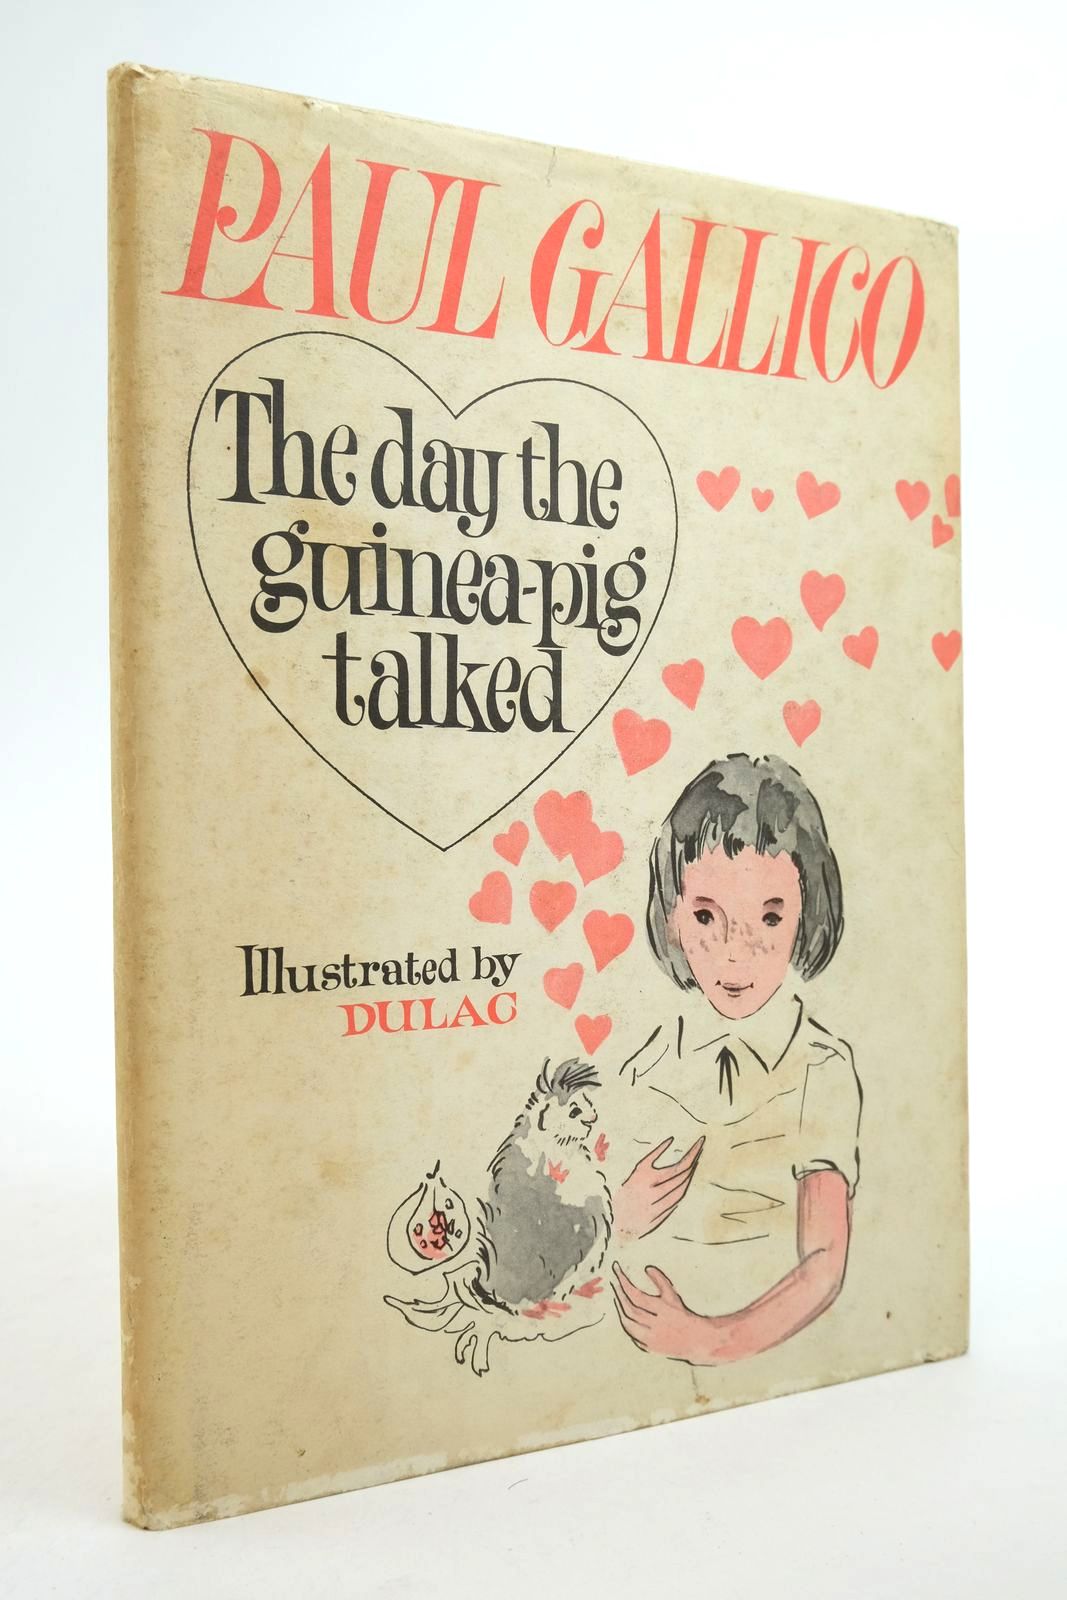 Photo of THE DAY THE GUINEA-PIG TALKED written by Gallico, Paul illustrated by Dulac,  published by Heinemann (STOCK CODE: 2140206)  for sale by Stella & Rose's Books